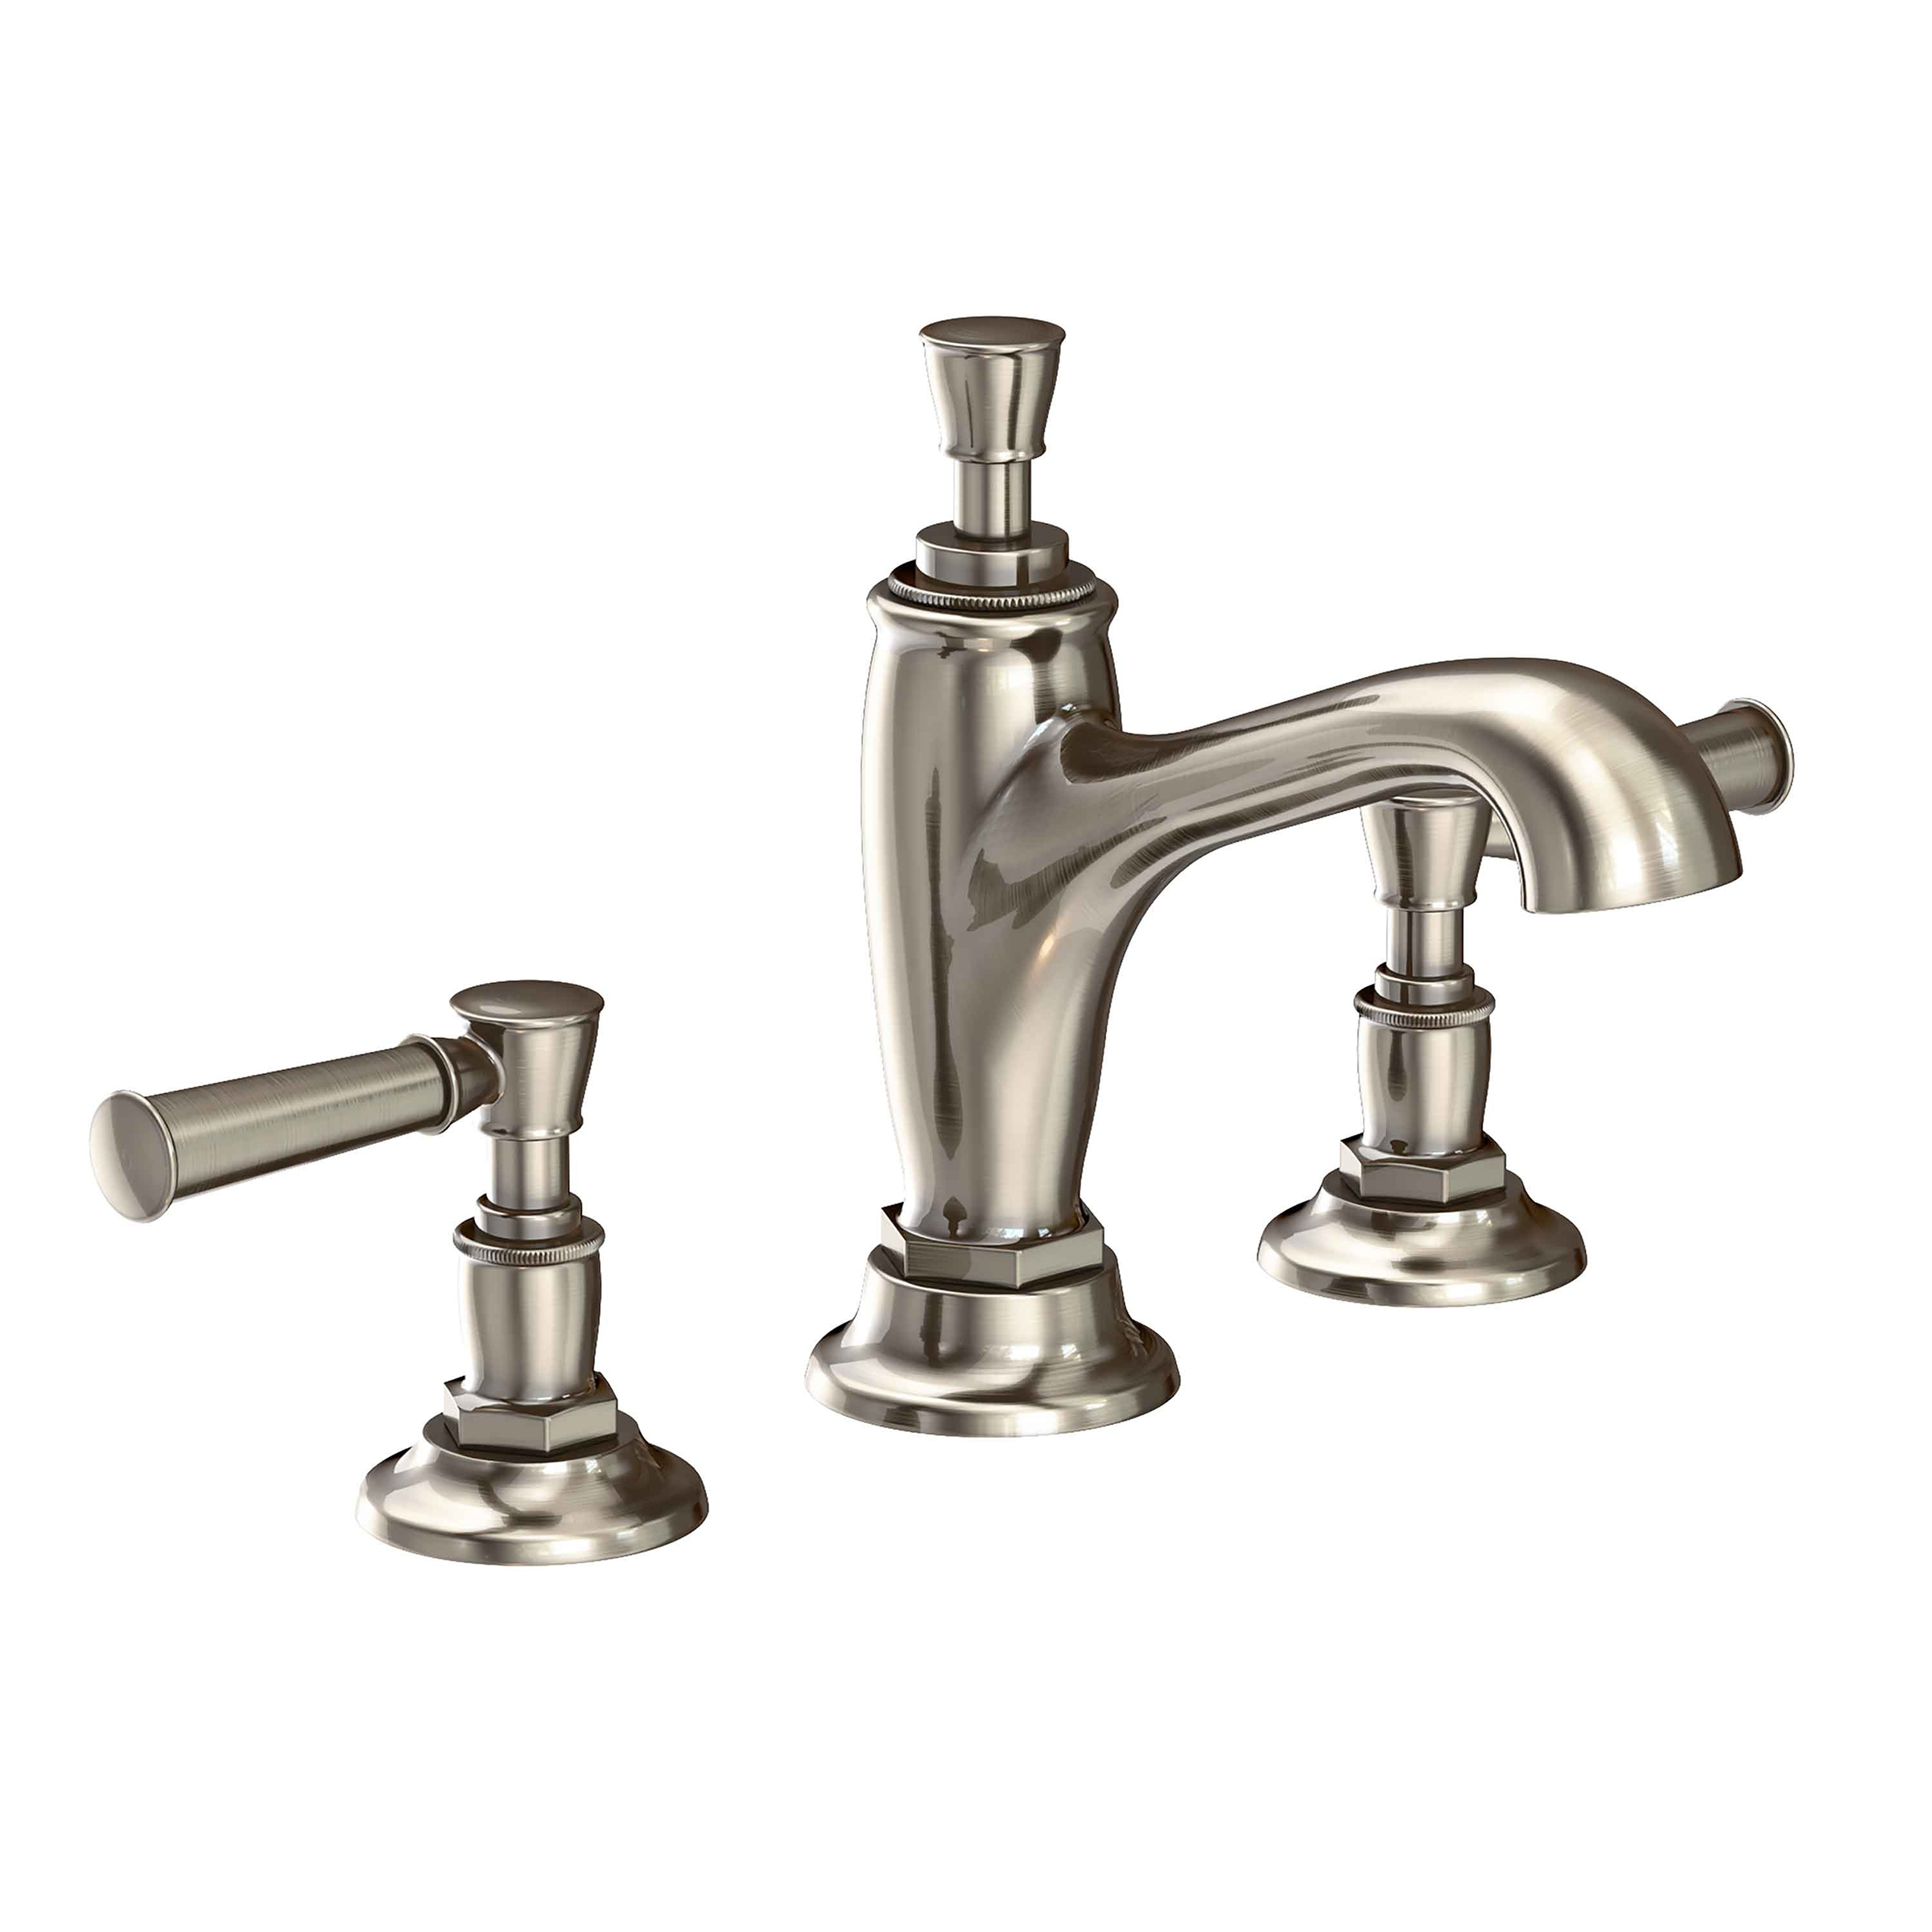 Newport Brass 2970/10 Dorrance 1.2 GPM Widespread Bathroom Faucet -  Includes Two Handles and Pop-Up Drain in Satin Bronze PVD